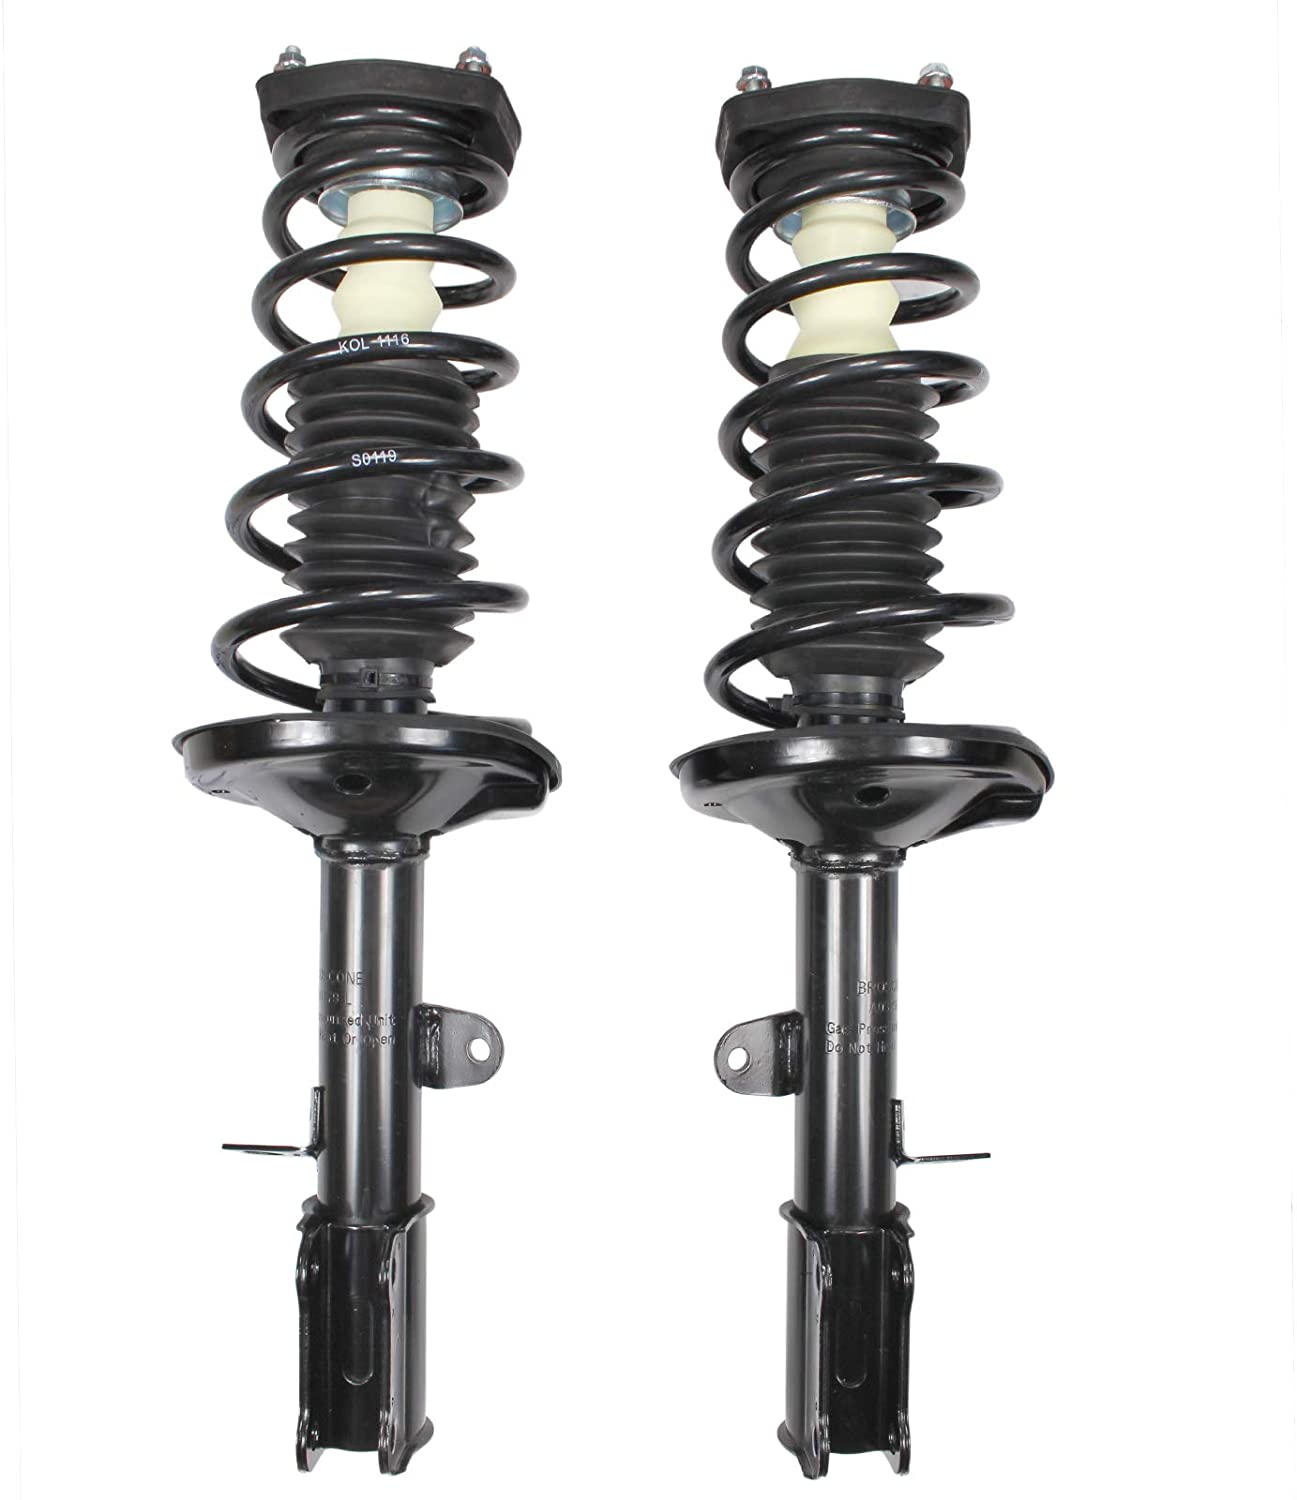 Deebior 2pcs Rear Suspension Gas Shock Absorber Strut & Springs Compatible With Toyota Corolla&Chevy Geo Prizm